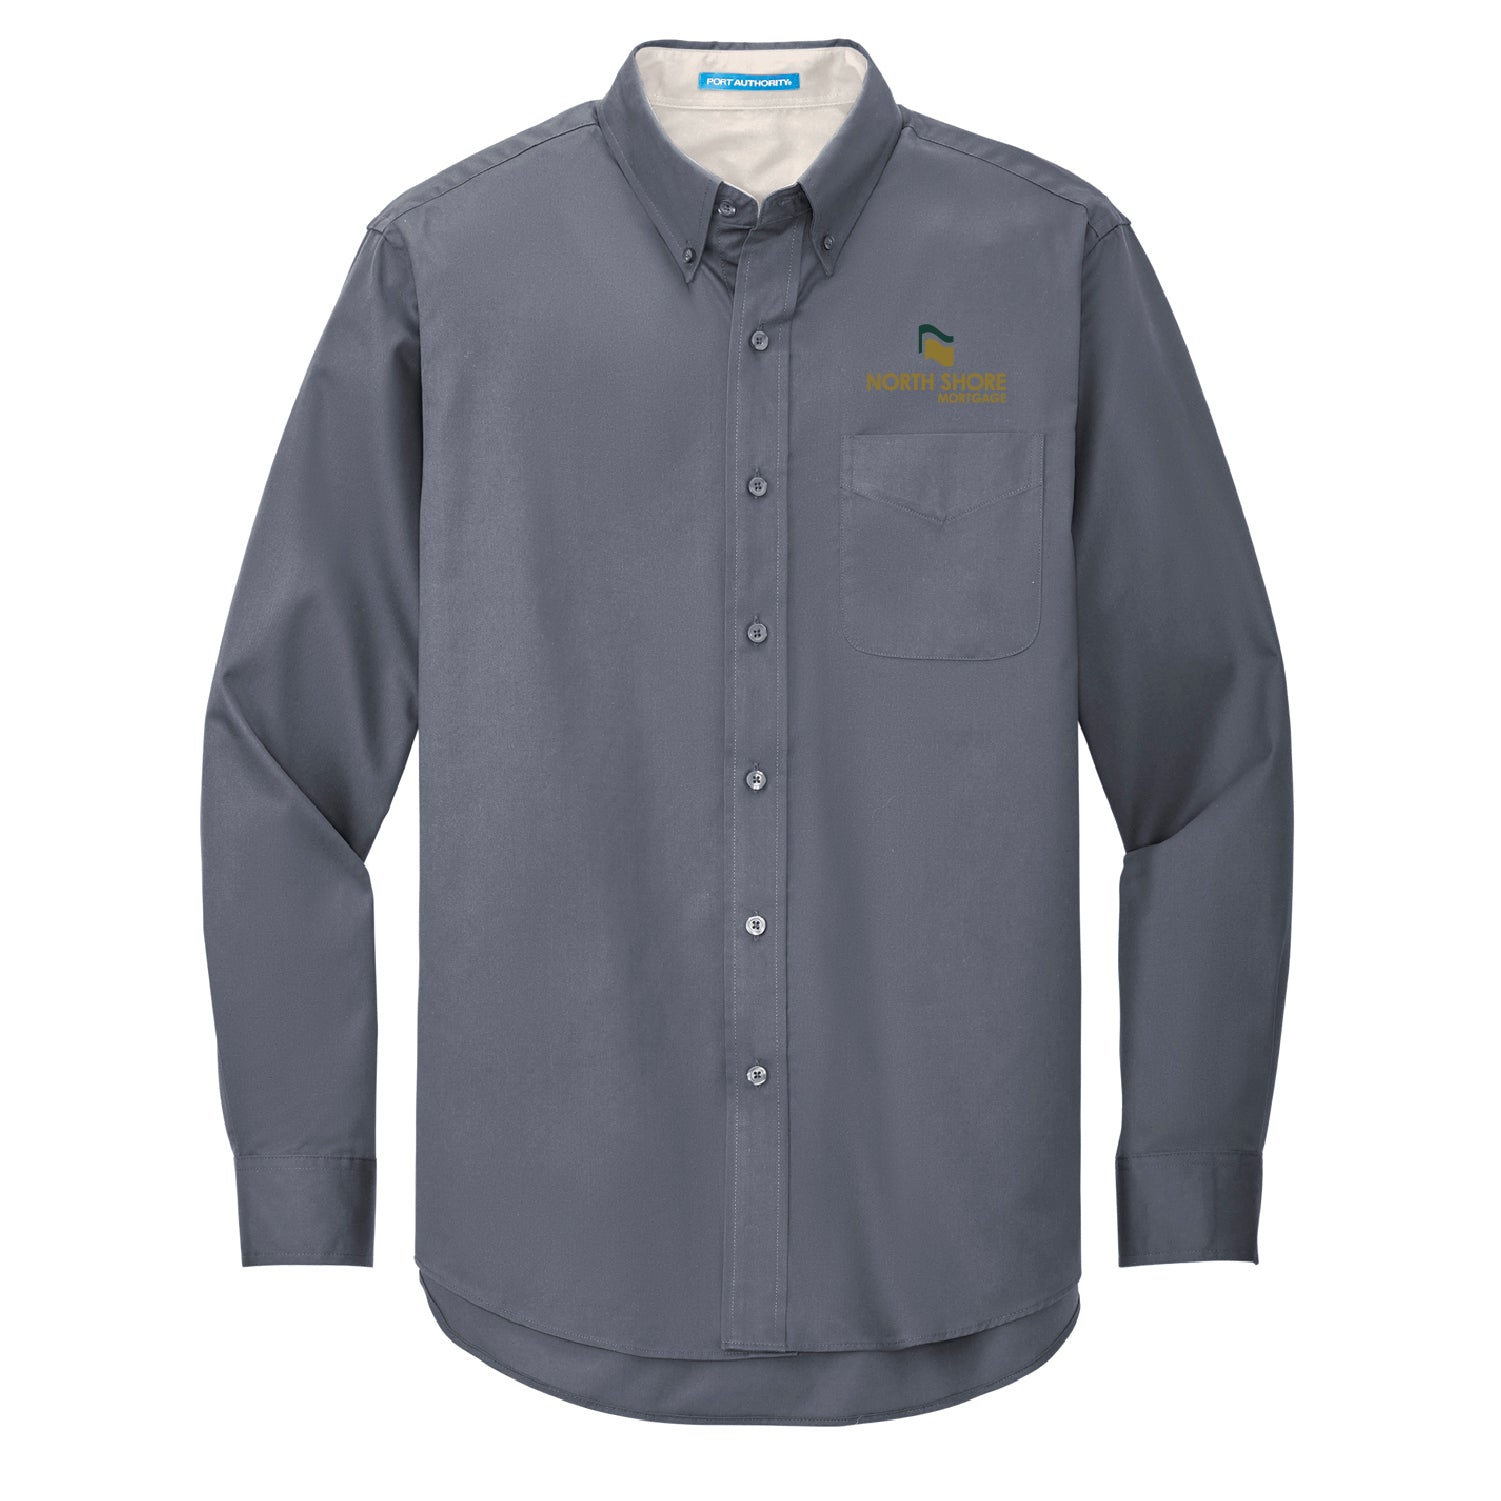 NSB Mortgage Long Sleeve Easy Care Shirt - DSP On Demand